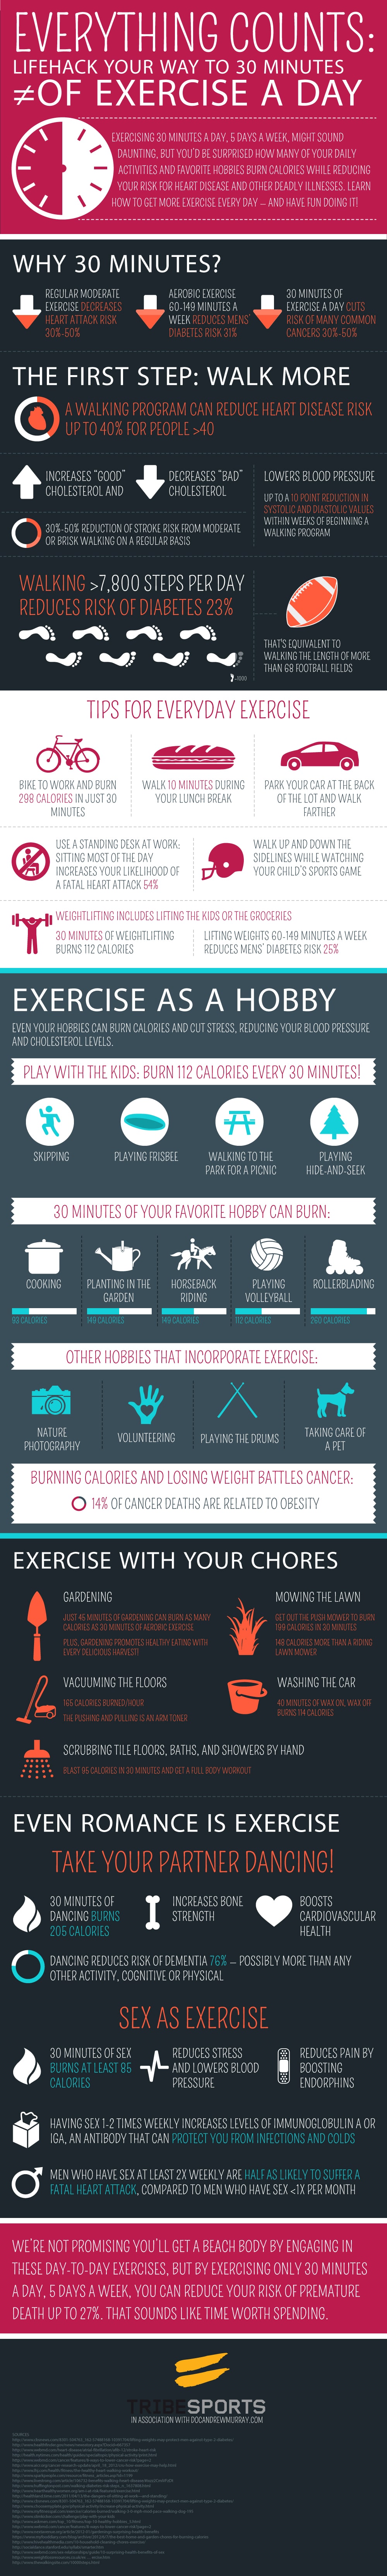 lifehack-exercise-guide-tips-infographic